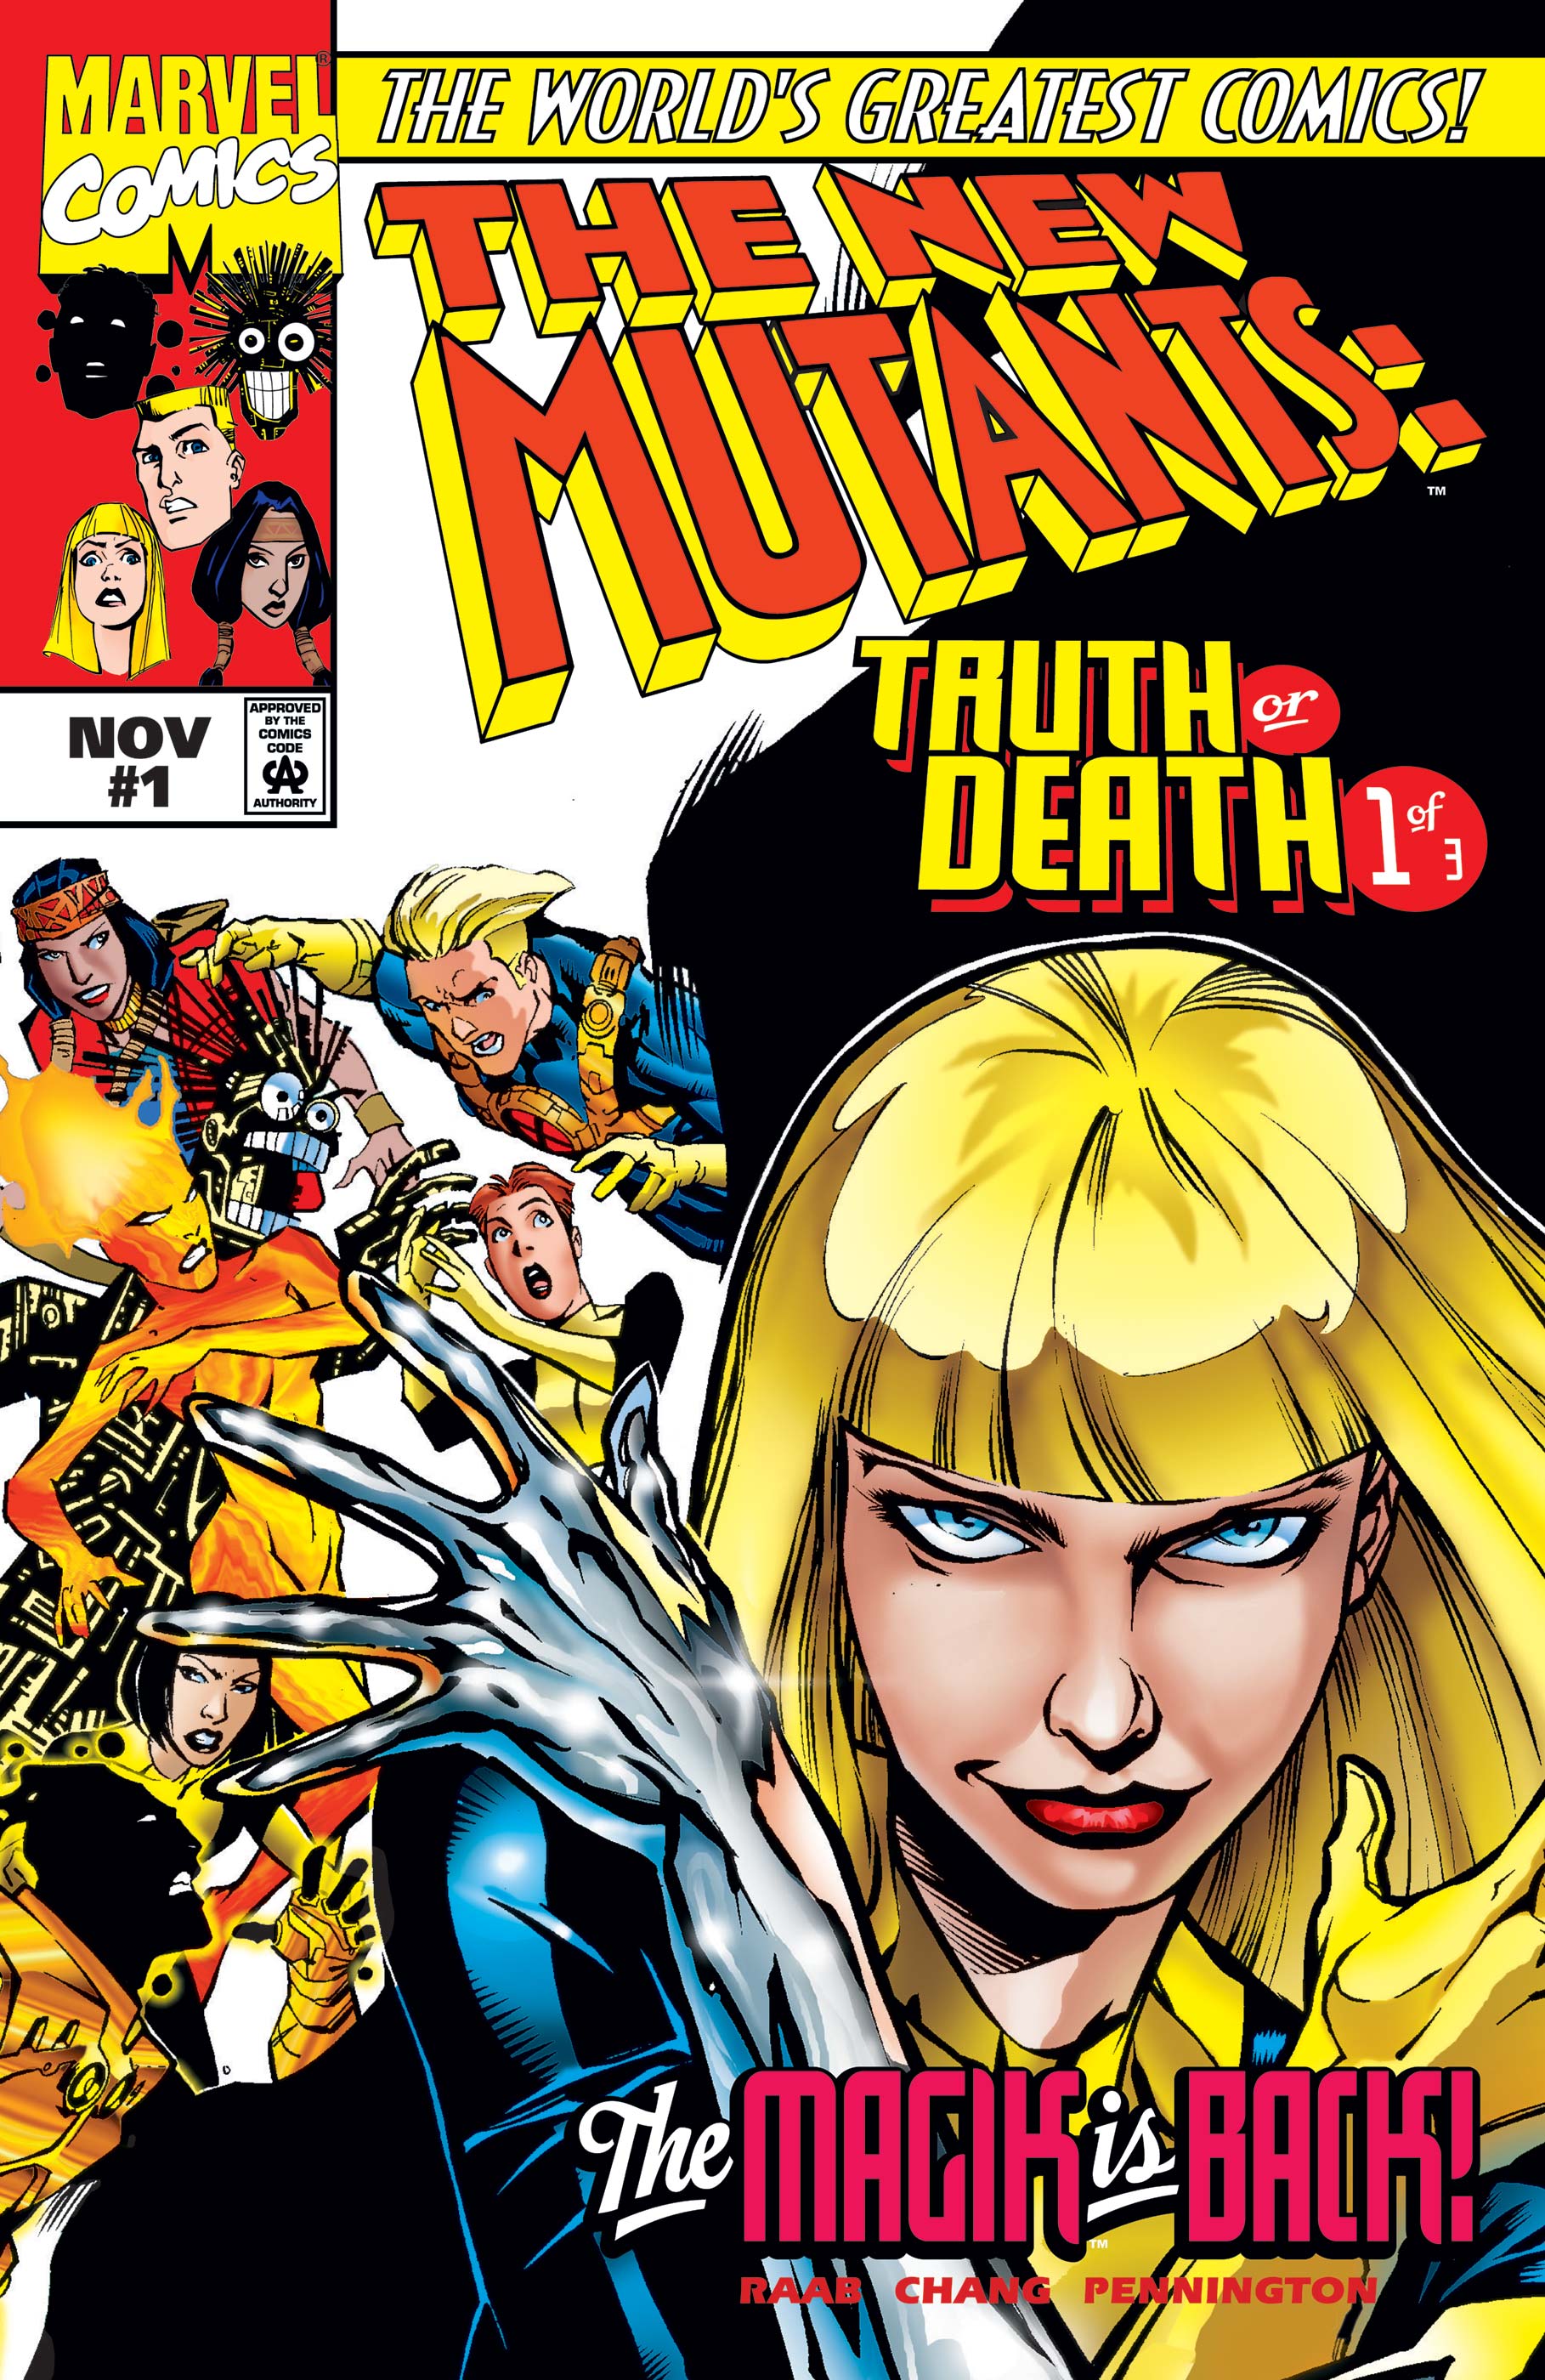 New mutants truth or death